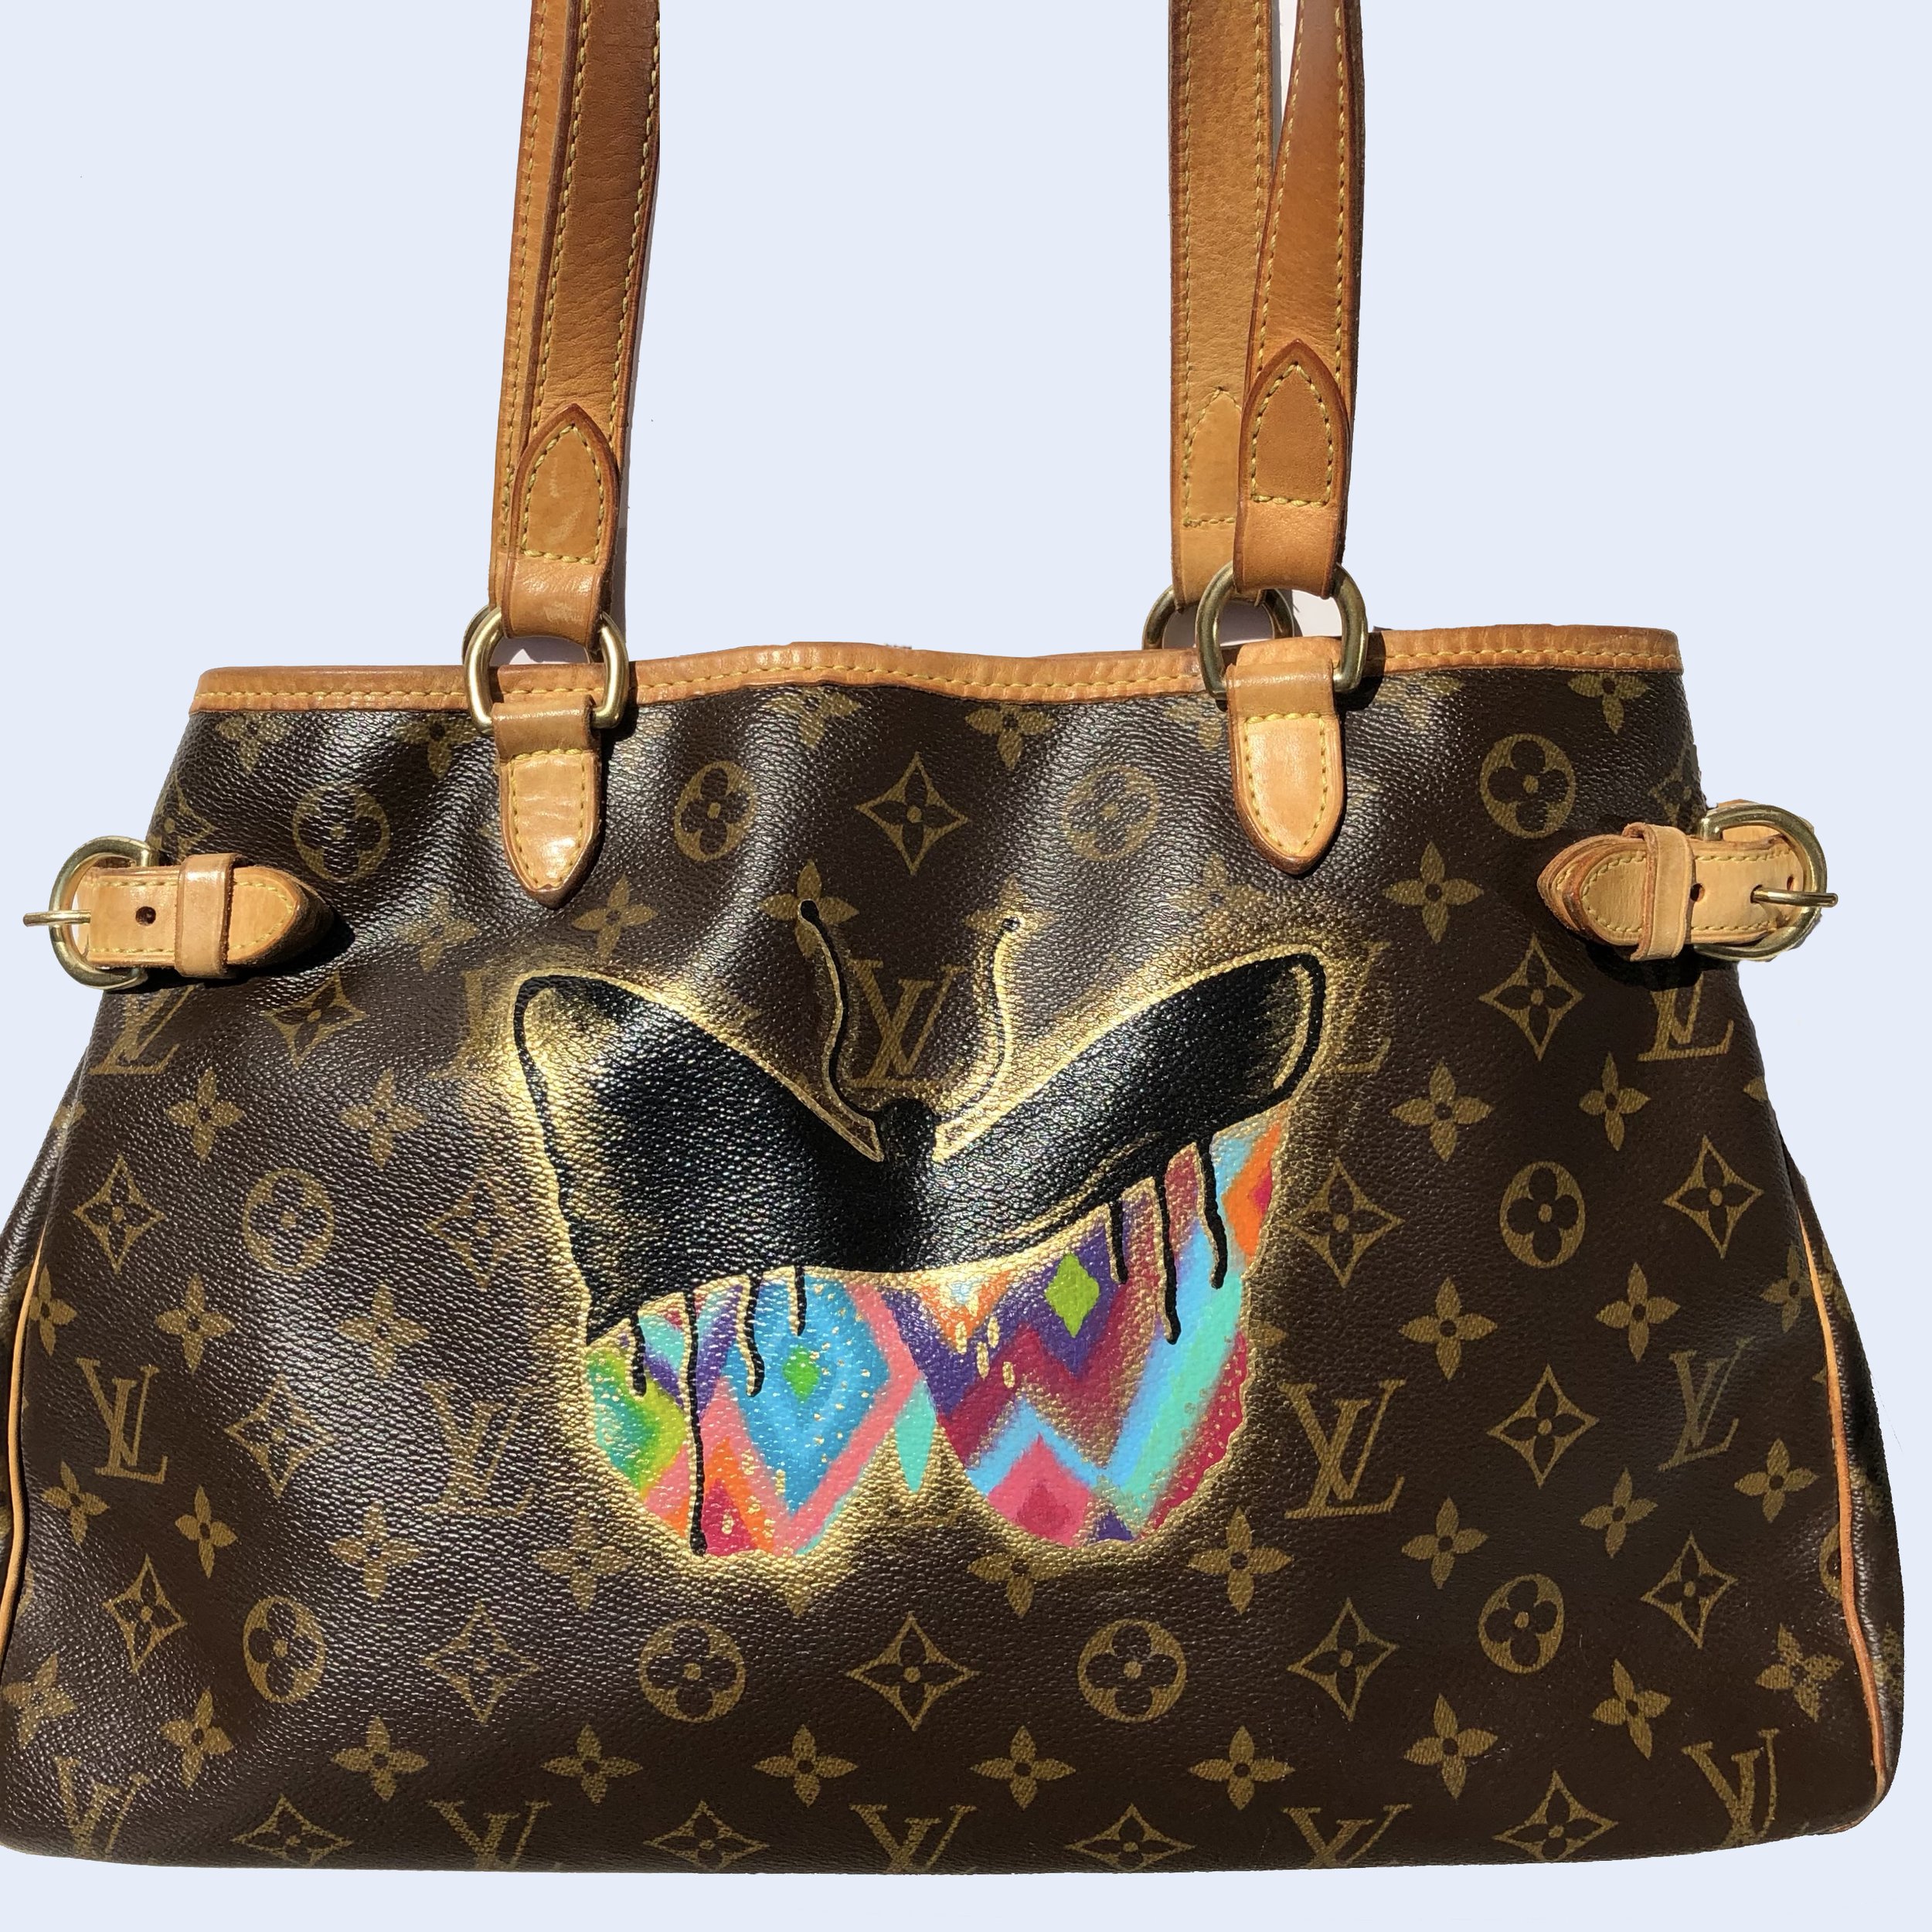 Pop Art by Michele Sobel Fine Art is a fabulous addition to your designer  bag. — Michele Sobel Fine Art Michele Sobel Fine Art Hand Painted Artwork  For Your Designer Bags